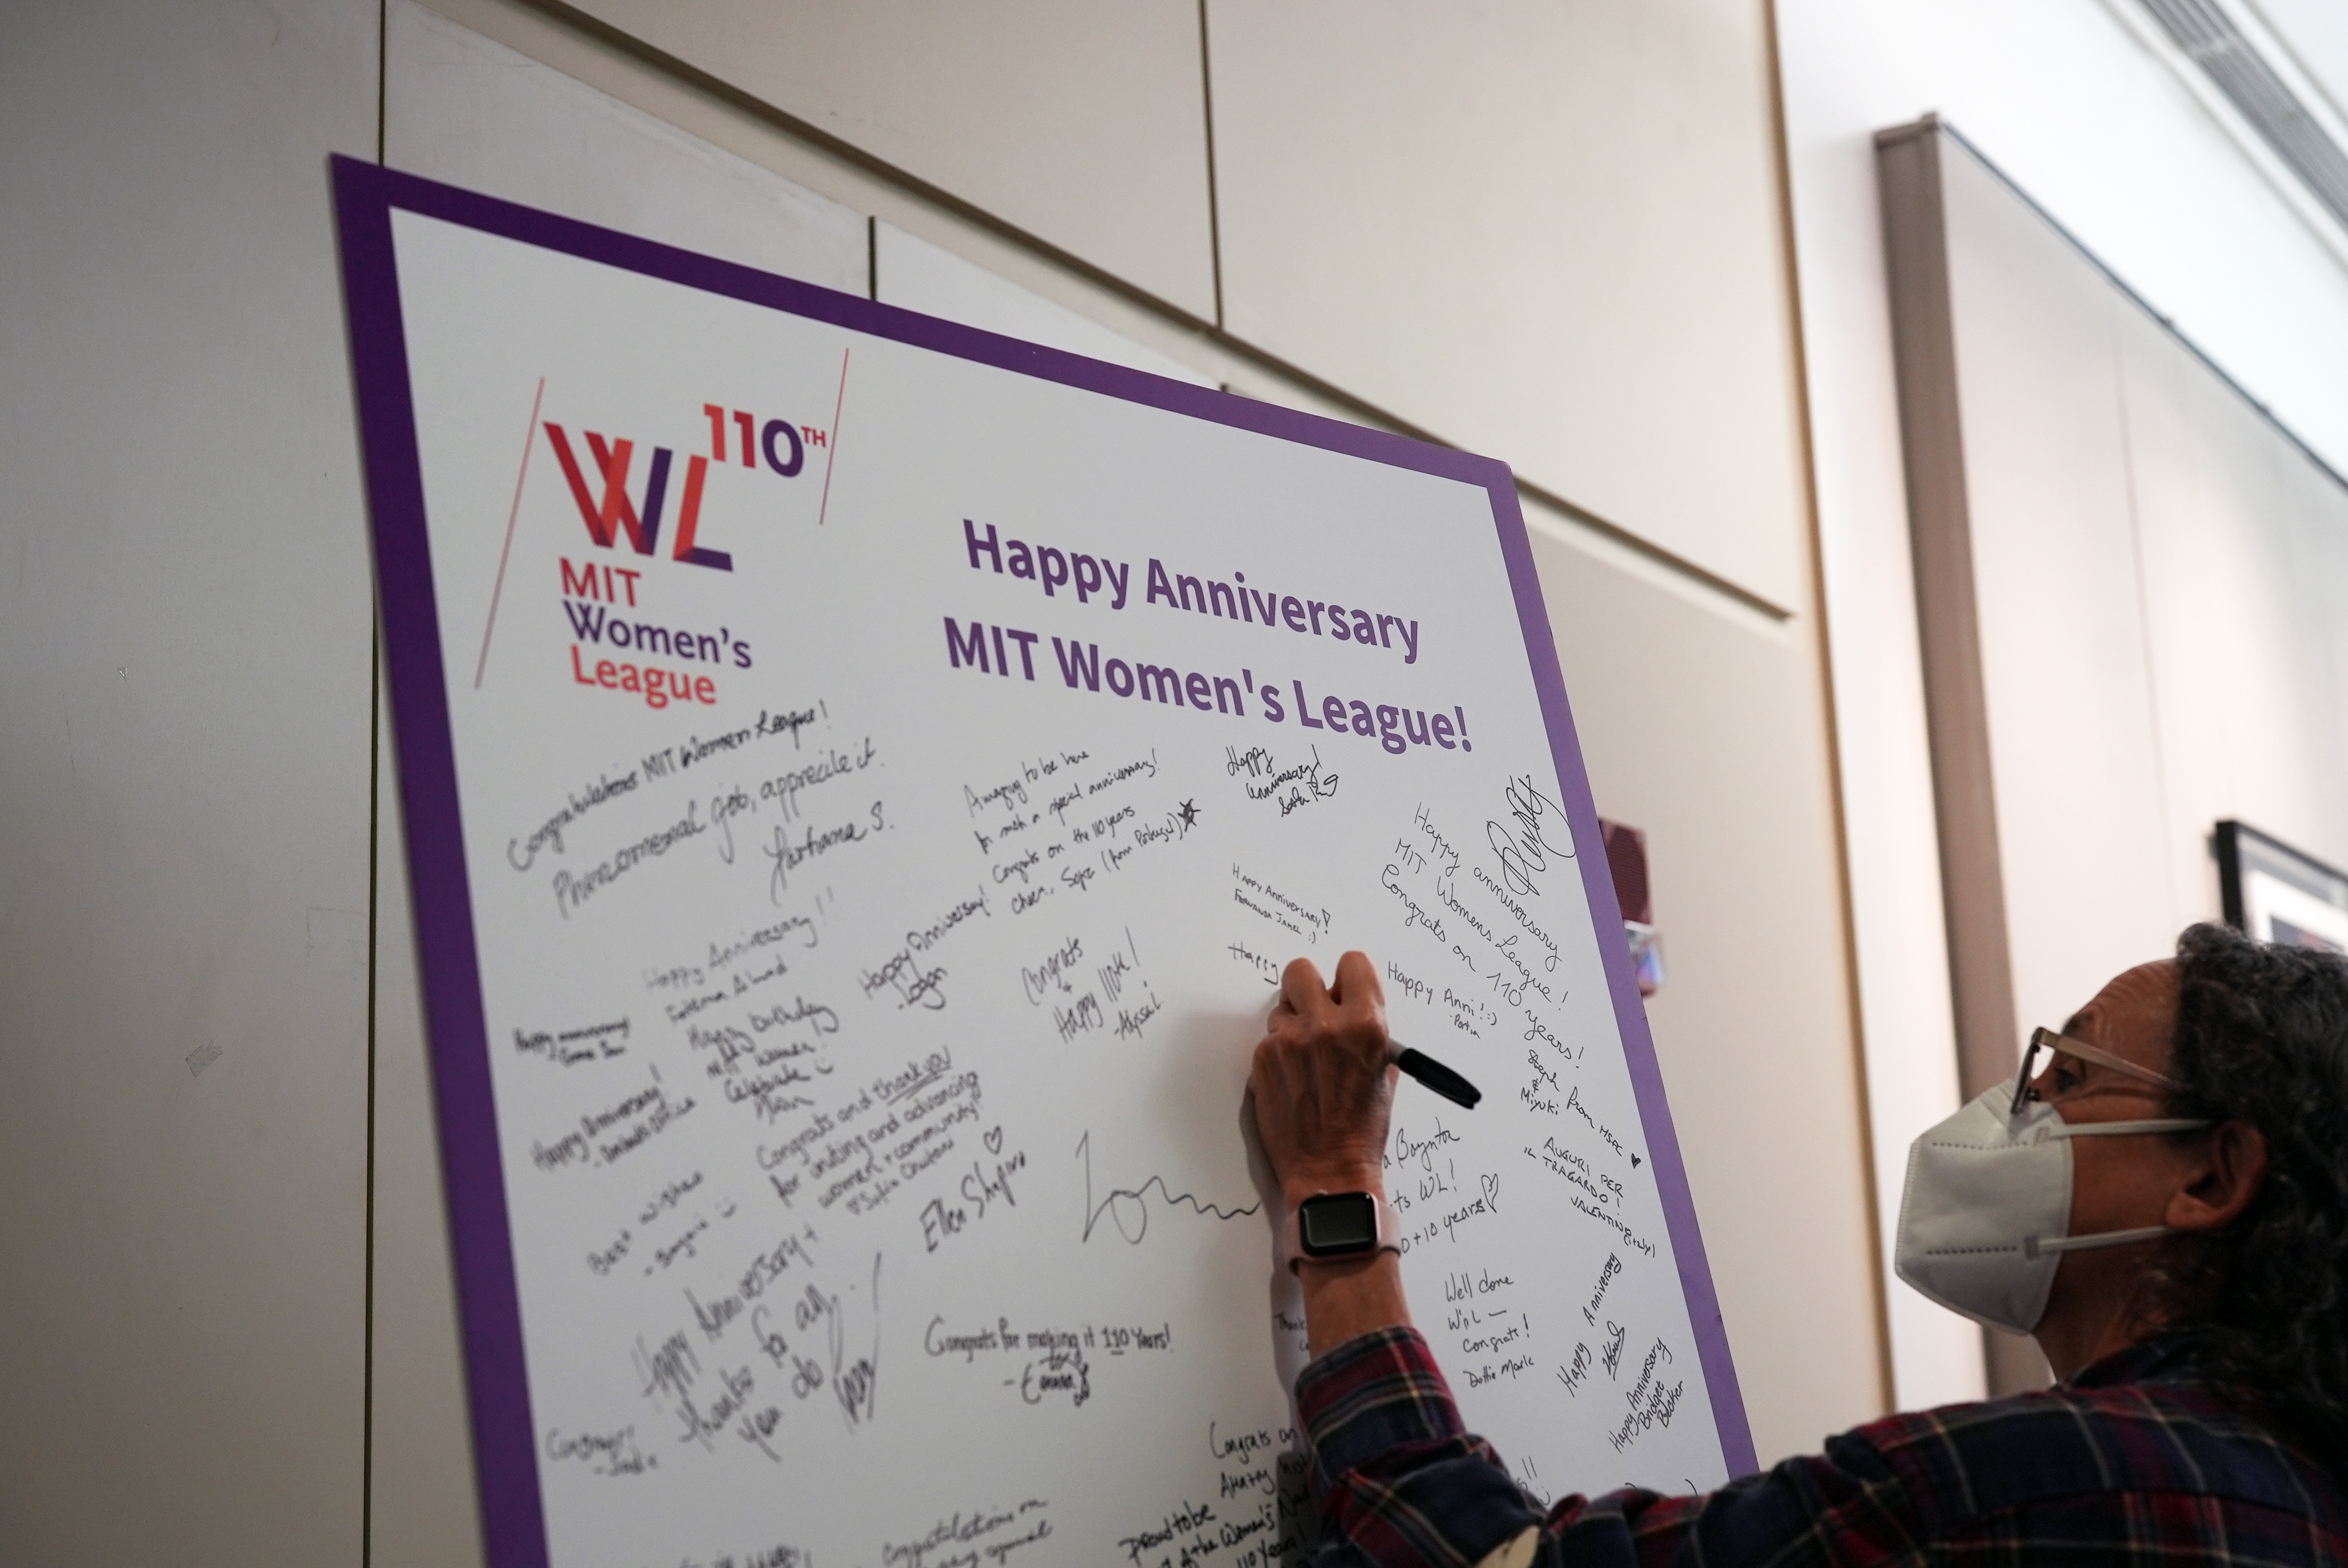 At its 110th anniversary celebration in October, the group displayed milestones in the League’s history side by side with key moments of MIT’s past.